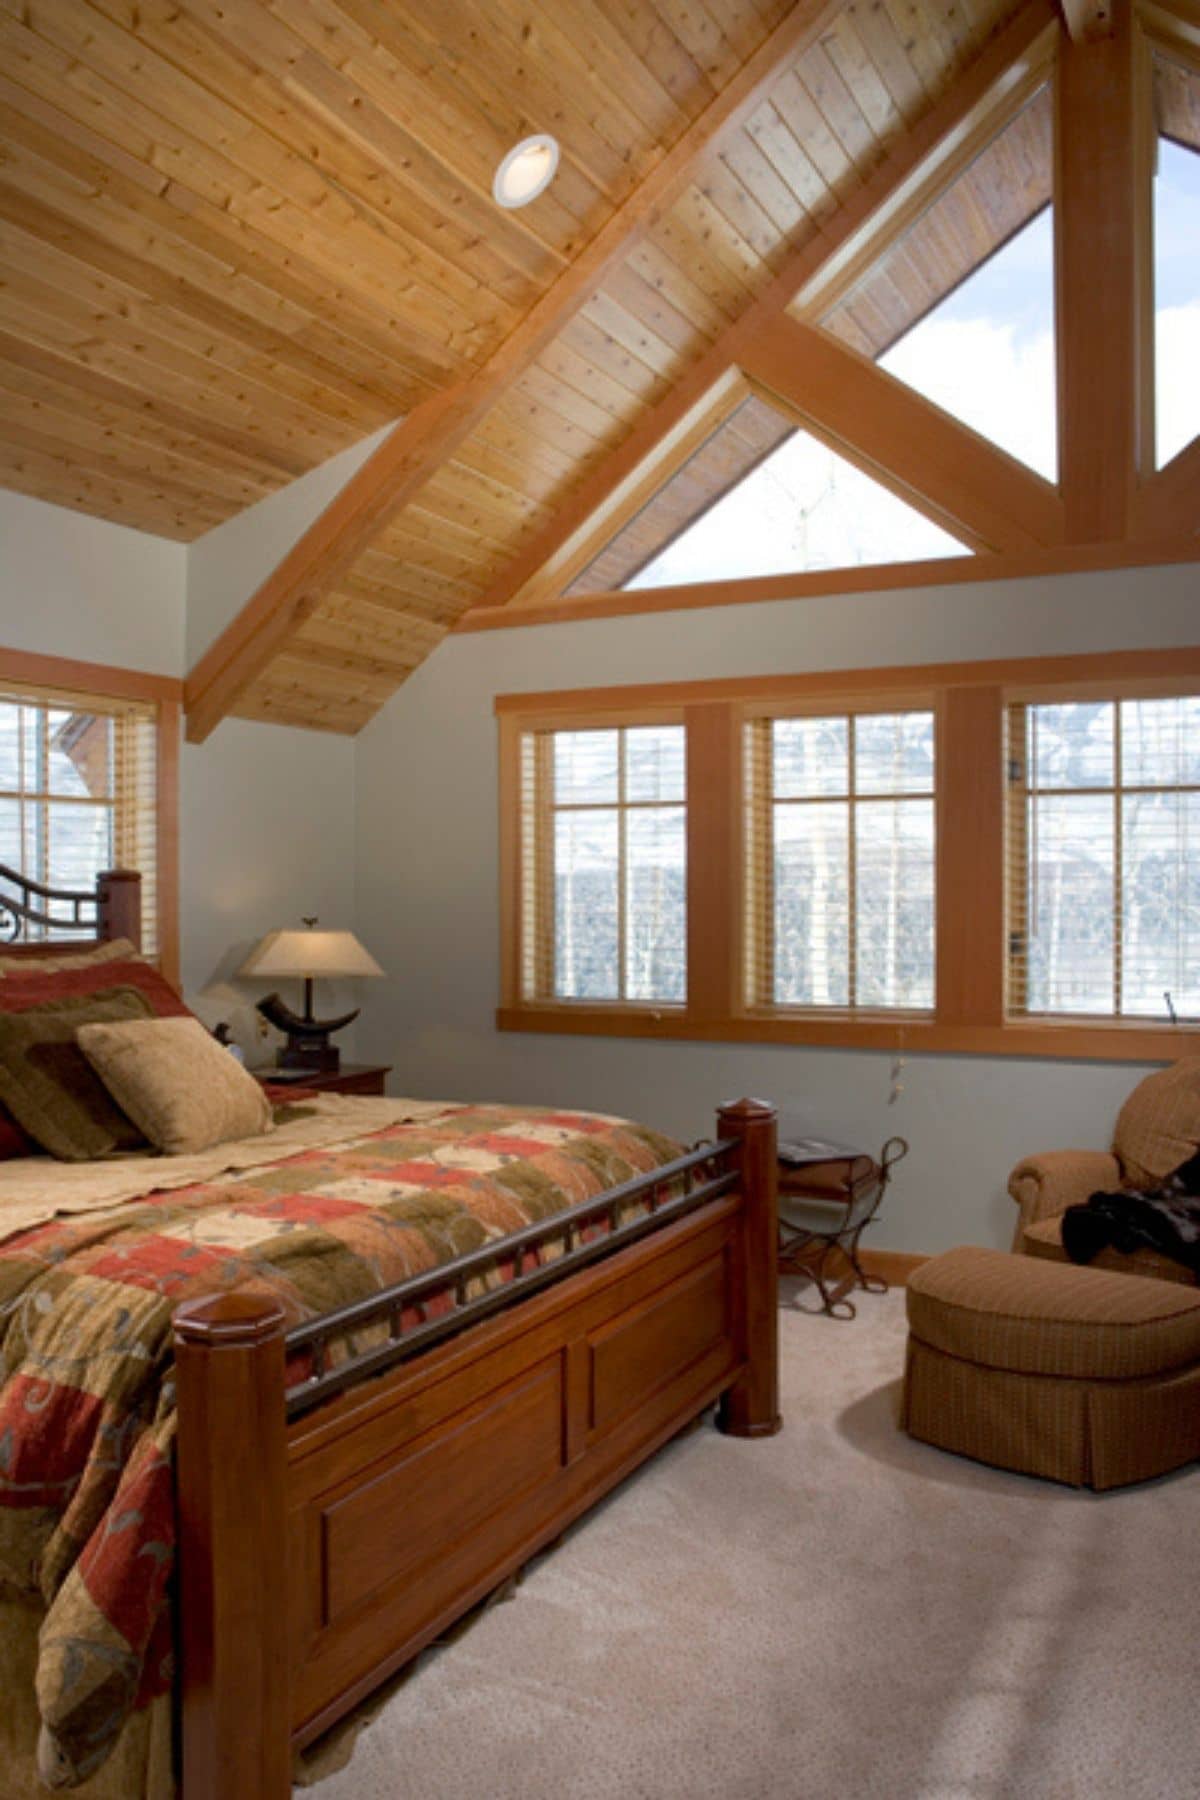 wooden bedframe with white walls and light wood ceiling in bedroom